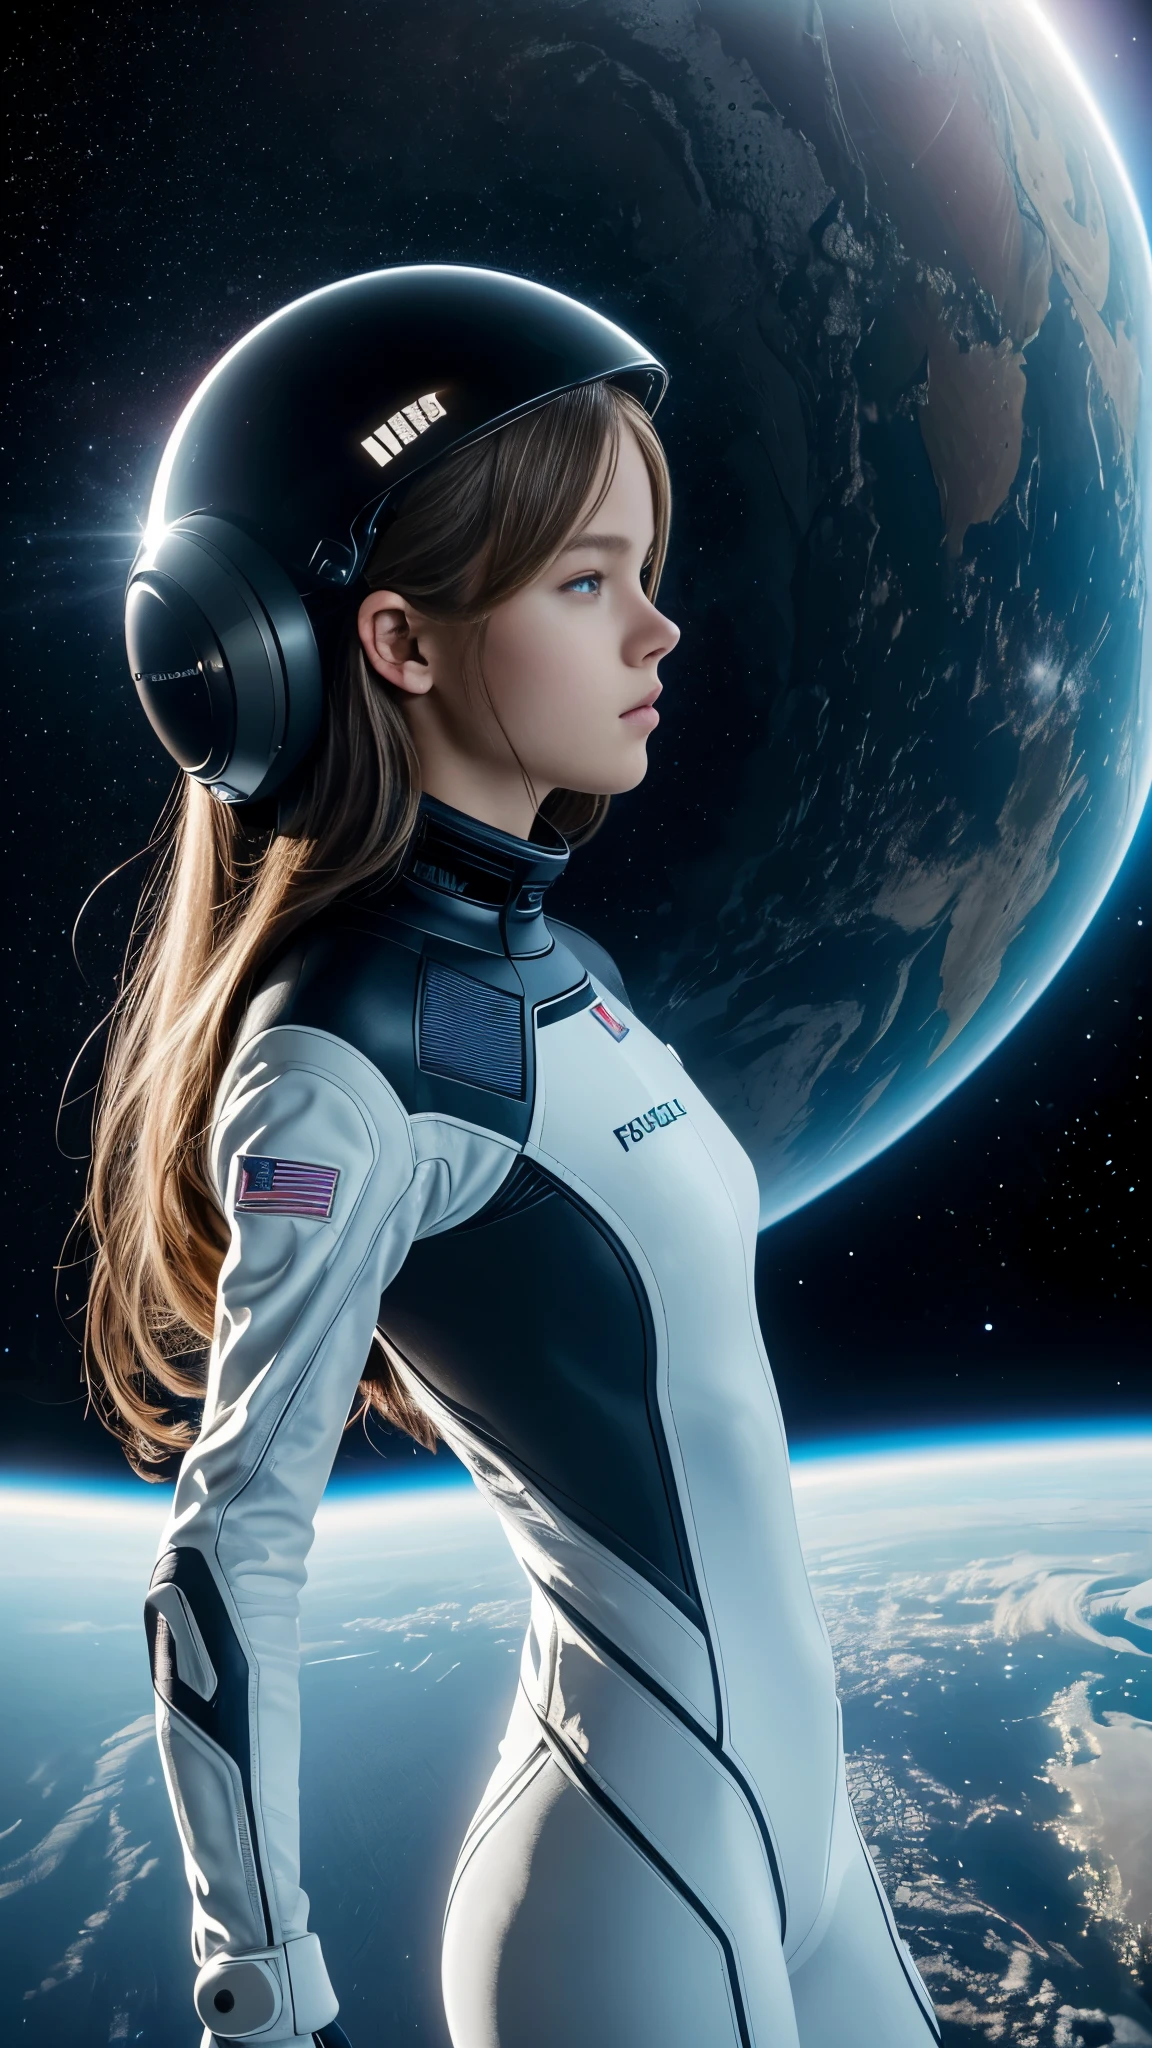 (photograph of a detailed beautiful 18-year old woman with ((facial and body characteristics that is similar to Kristina Pimenova))), finely detailed, ultra-realistic features of her pale skin and (slender and athletic body), and (symmetrical, realistic and beautiful face), Propel viewers into outer space with an astronaut's zero gravity exploration. The model, clad in a futuristic space suit, gracefully floats in a simulated zero-gravity environment. The camera, a DSLR with a fisheye lens, captures the otherworldly scene from a frontal angle, accentuating the curvature of the Earth in the background. The model's hair is styled in a sleek and functional astronaut helmet. Props include scientific instruments. The photographic style is high-tech and immersive, with a cosmic color palette.